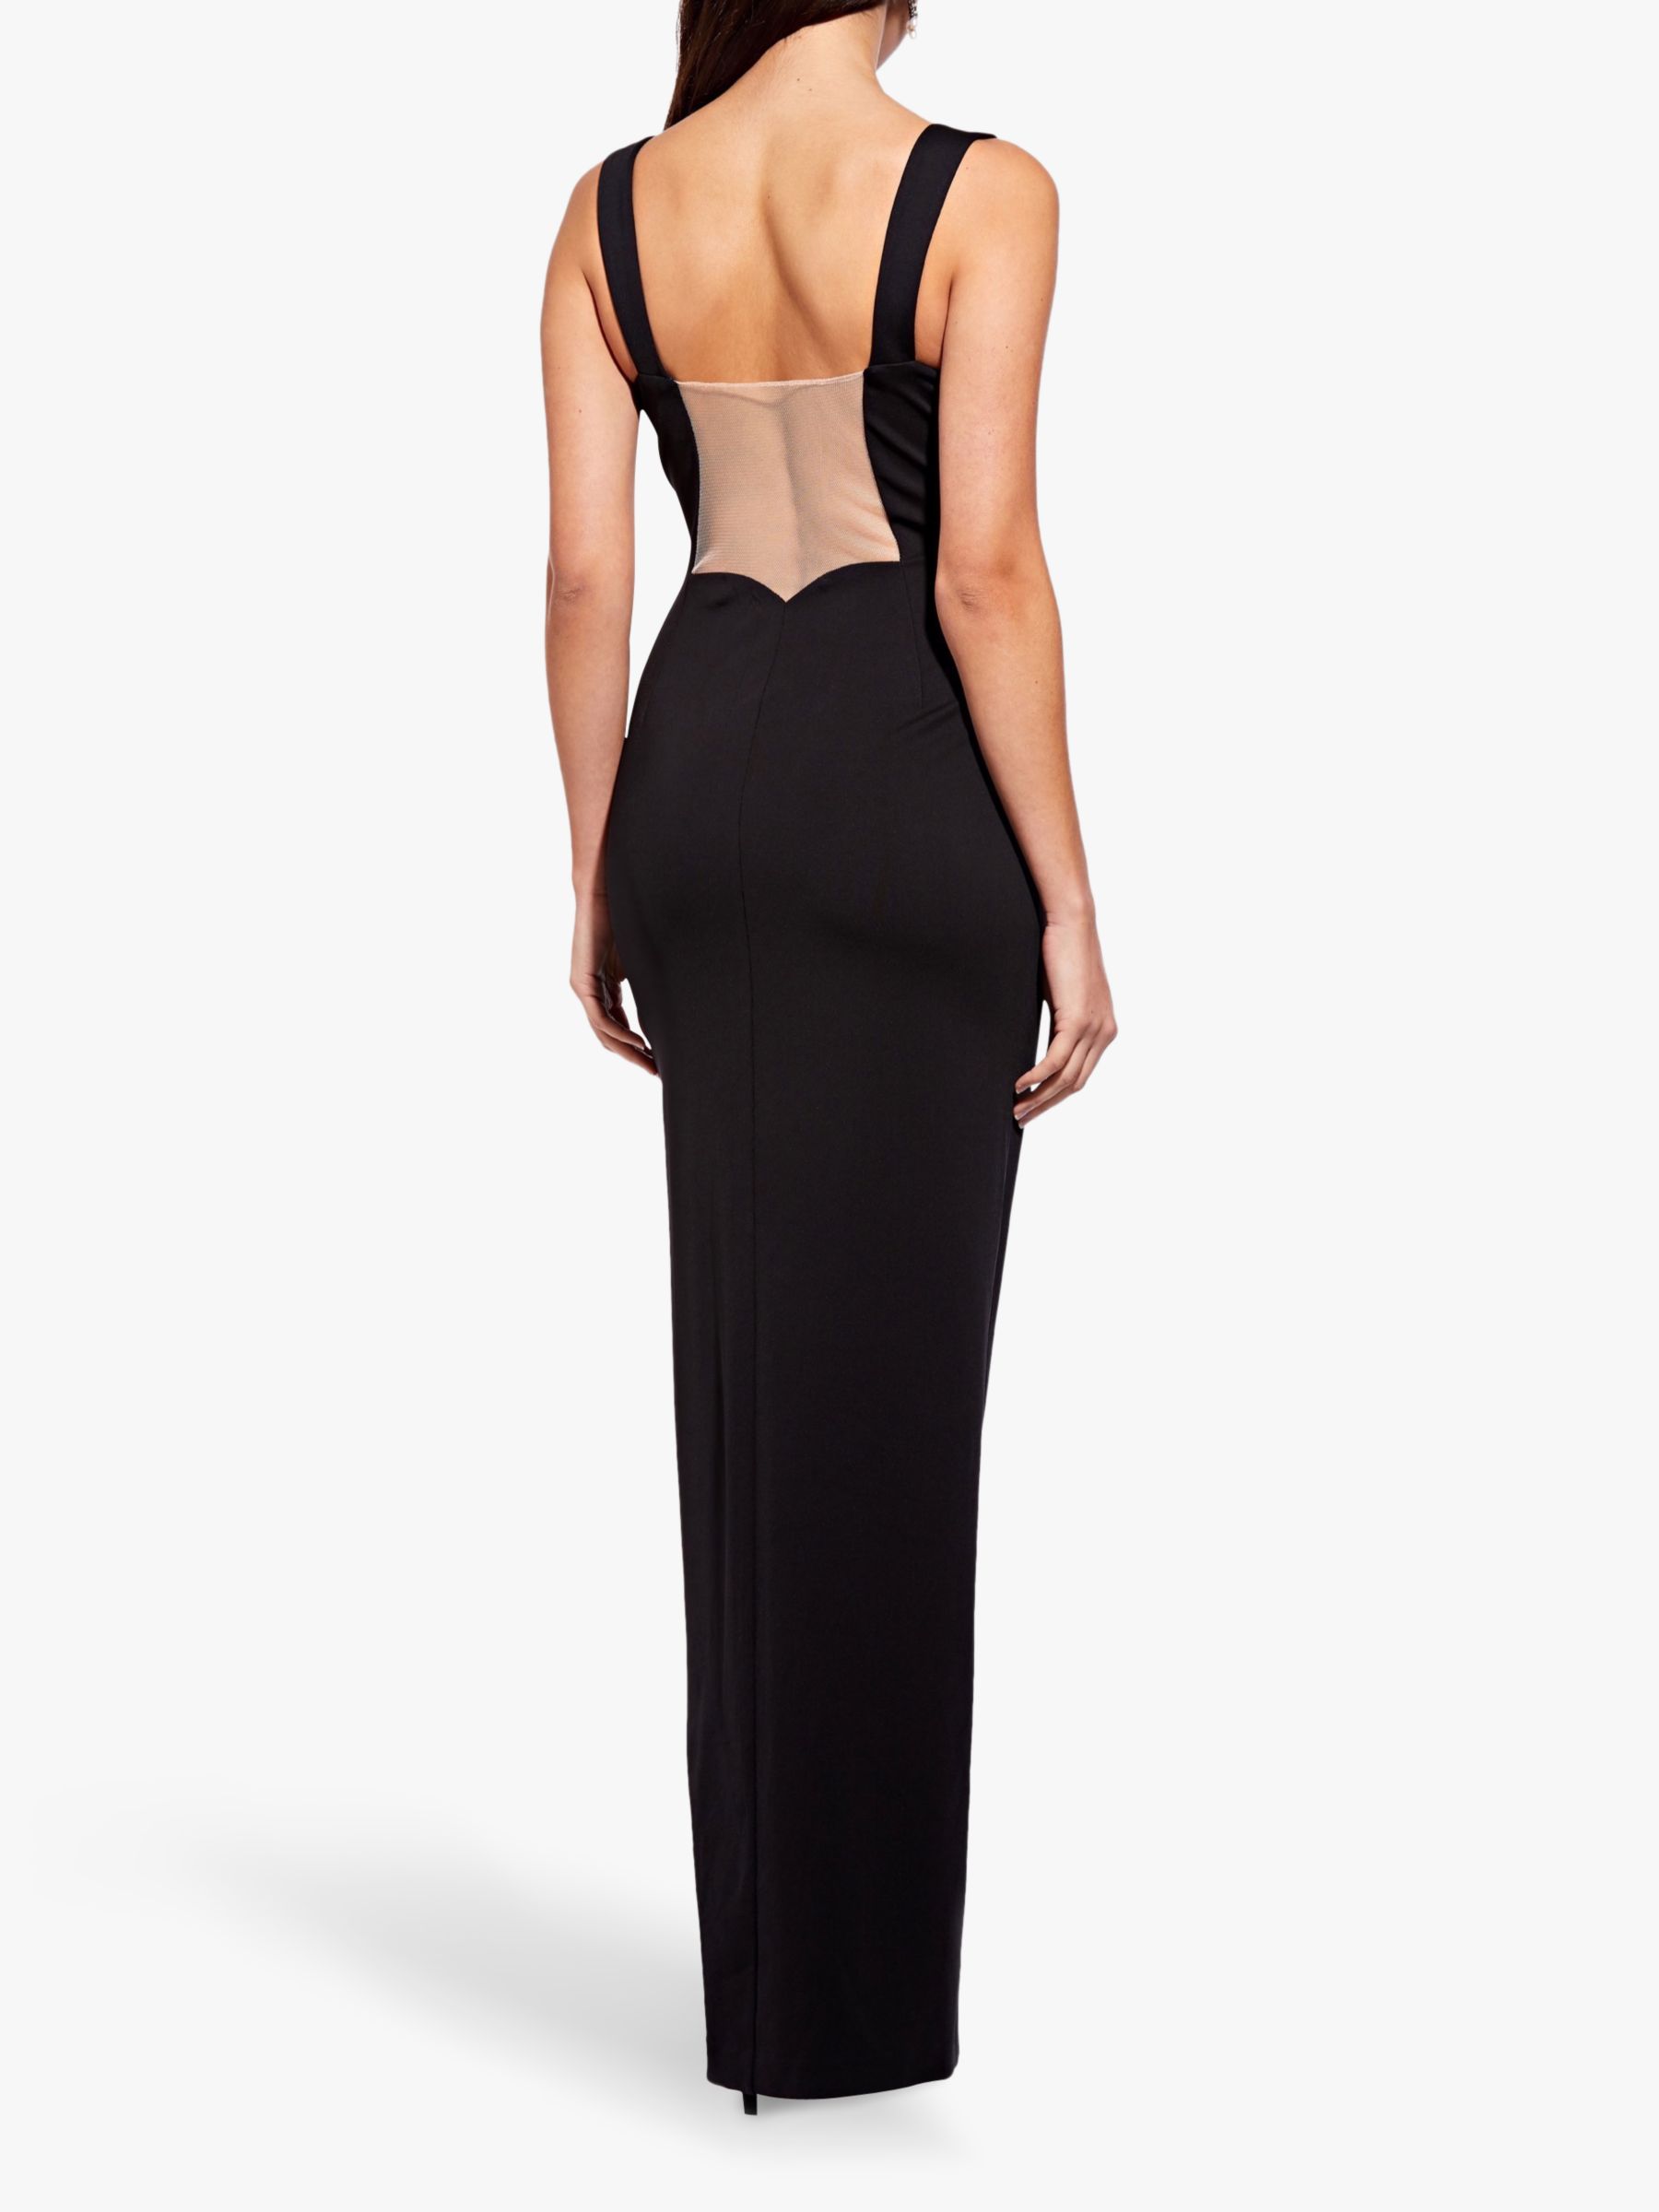 adrianna papell lola jersey gown